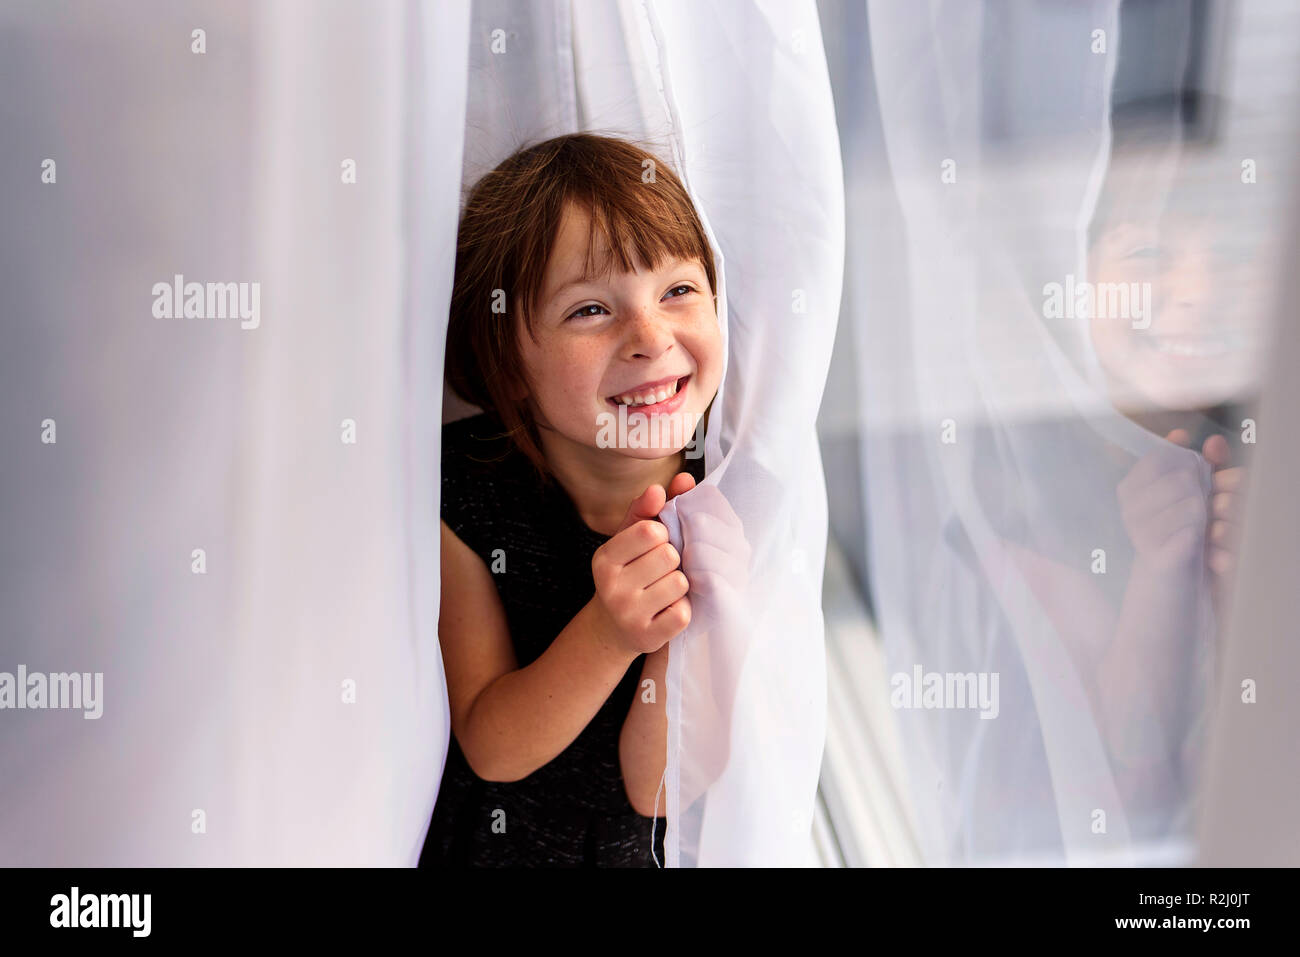 Girl hiding behind a curtain laughing Stock Photo